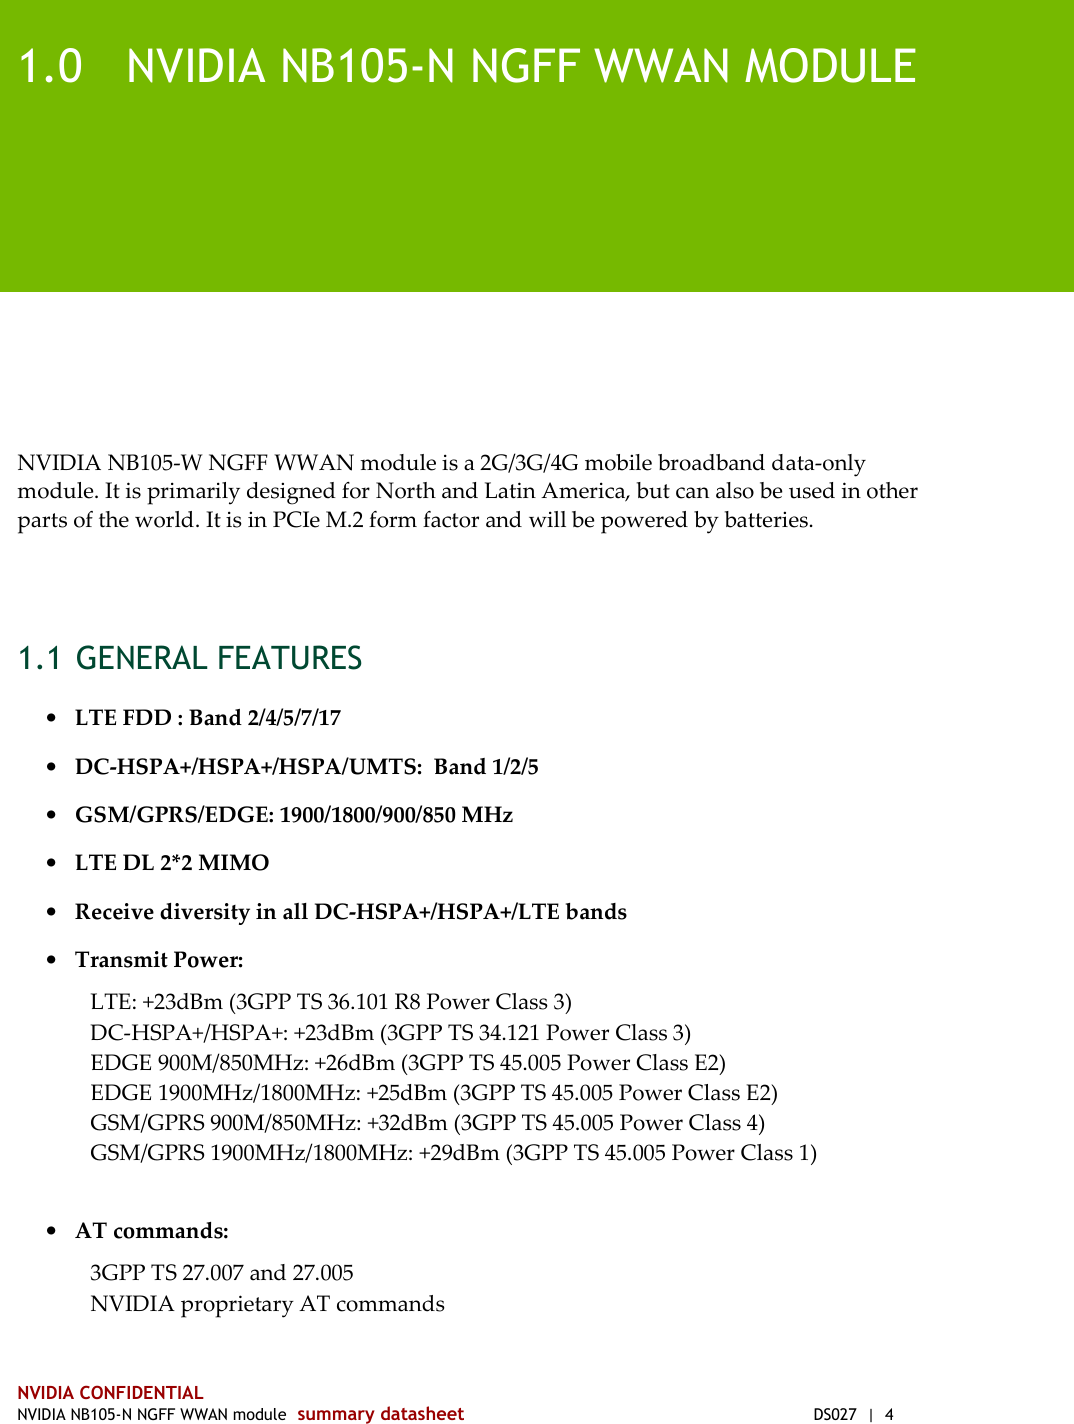  NVIDIA CONFIDENTIAL NVIDIA NB105-N NGFF WWAN module  summary datasheet  DS027  |  4 1.0 NVIDIA NB105-N NGFF WWAN MODULE NVIDIA NB105-W NGFF WWAN module is a 2G/3G/4G mobile broadband data-only module. It is primarily designed for North and Latin America, but can also be used in other parts of the world. It is in PCIe M.2 form factor and will be powered by batteries.  1.1 GENERAL FEATURES • LTE FDD : Band 2/4/5/7/17 • DC-HSPA+/HSPA+/HSPA/UMTS:  Band 1/2/5 • GSM/GPRS/EDGE: 1900/1800/900/850 MHz • LTE DL 2*2 MIMO • Receive diversity in all DC-HSPA+/HSPA+/LTE bands • Transmit Power: LTE: +23dBm (3GPP TS 36.101 R8 Power Class 3)  DC-HSPA+/HSPA+: +23dBm (3GPP TS 34.121 Power Class 3) EDGE 900M/850MHz: +26dBm (3GPP TS 45.005 Power Class E2)  EDGE 1900MHz/1800MHz: +25dBm (3GPP TS 45.005 Power Class E2)  GSM/GPRS 900M/850MHz: +32dBm (3GPP TS 45.005 Power Class 4) GSM/GPRS 1900MHz/1800MHz: +29dBm (3GPP TS 45.005 Power Class 1)   • AT commands: 3GPP TS 27.007 and 27.005  NVIDIA proprietary AT commands 